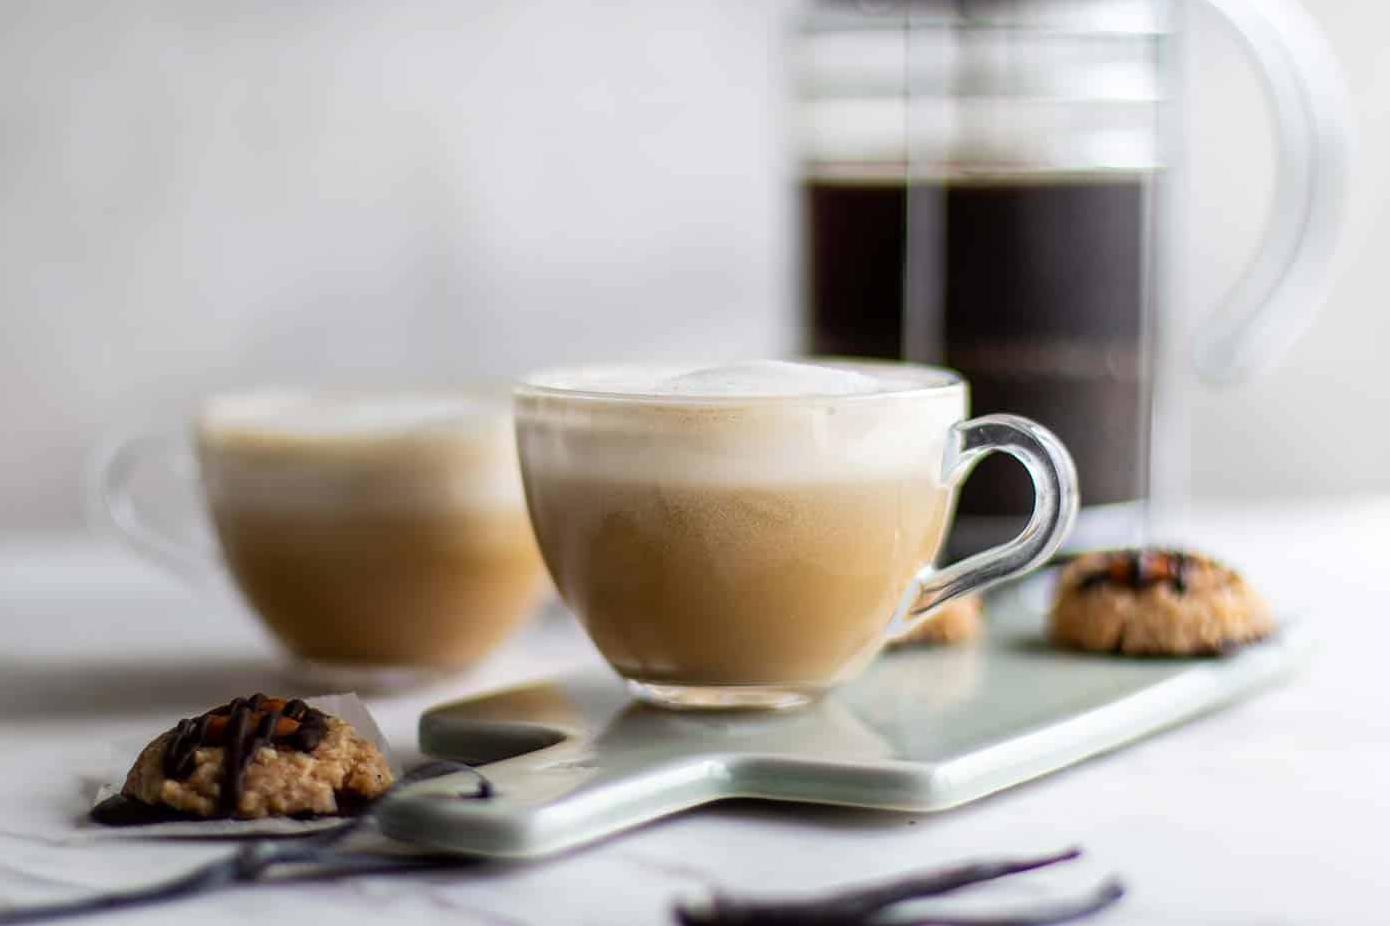  How almond do you like your coffee? Add just the right amount with this recipe. 🥛